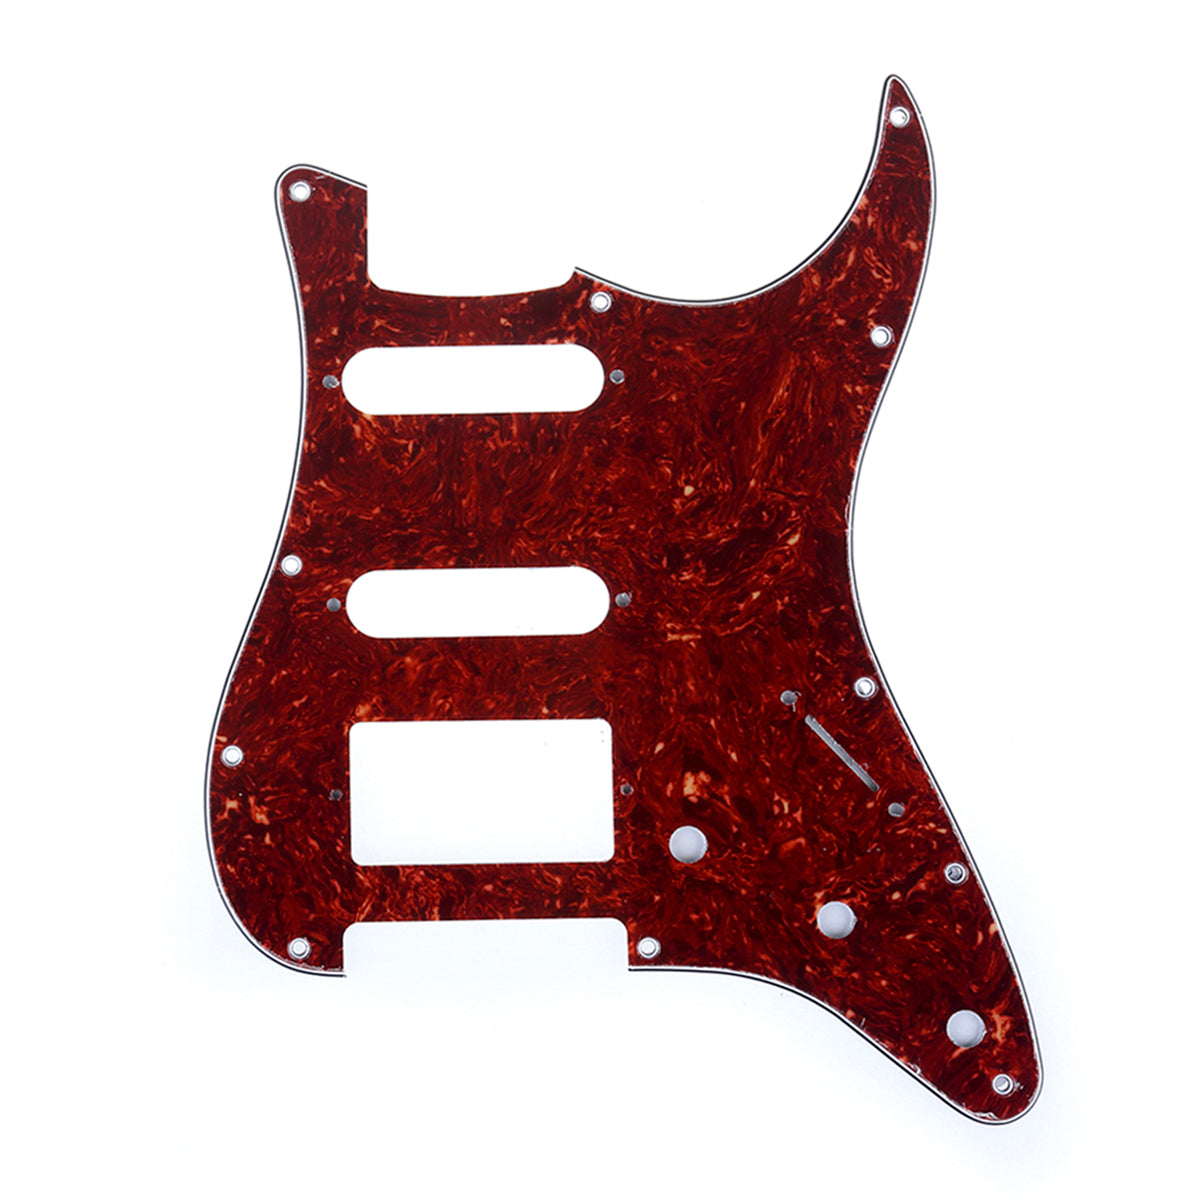 Musiclily Pro 11-Hole Modern Style Strat HSS Pickguard for American Stratocaster Guitar, 4Ply Vintage Tortoise